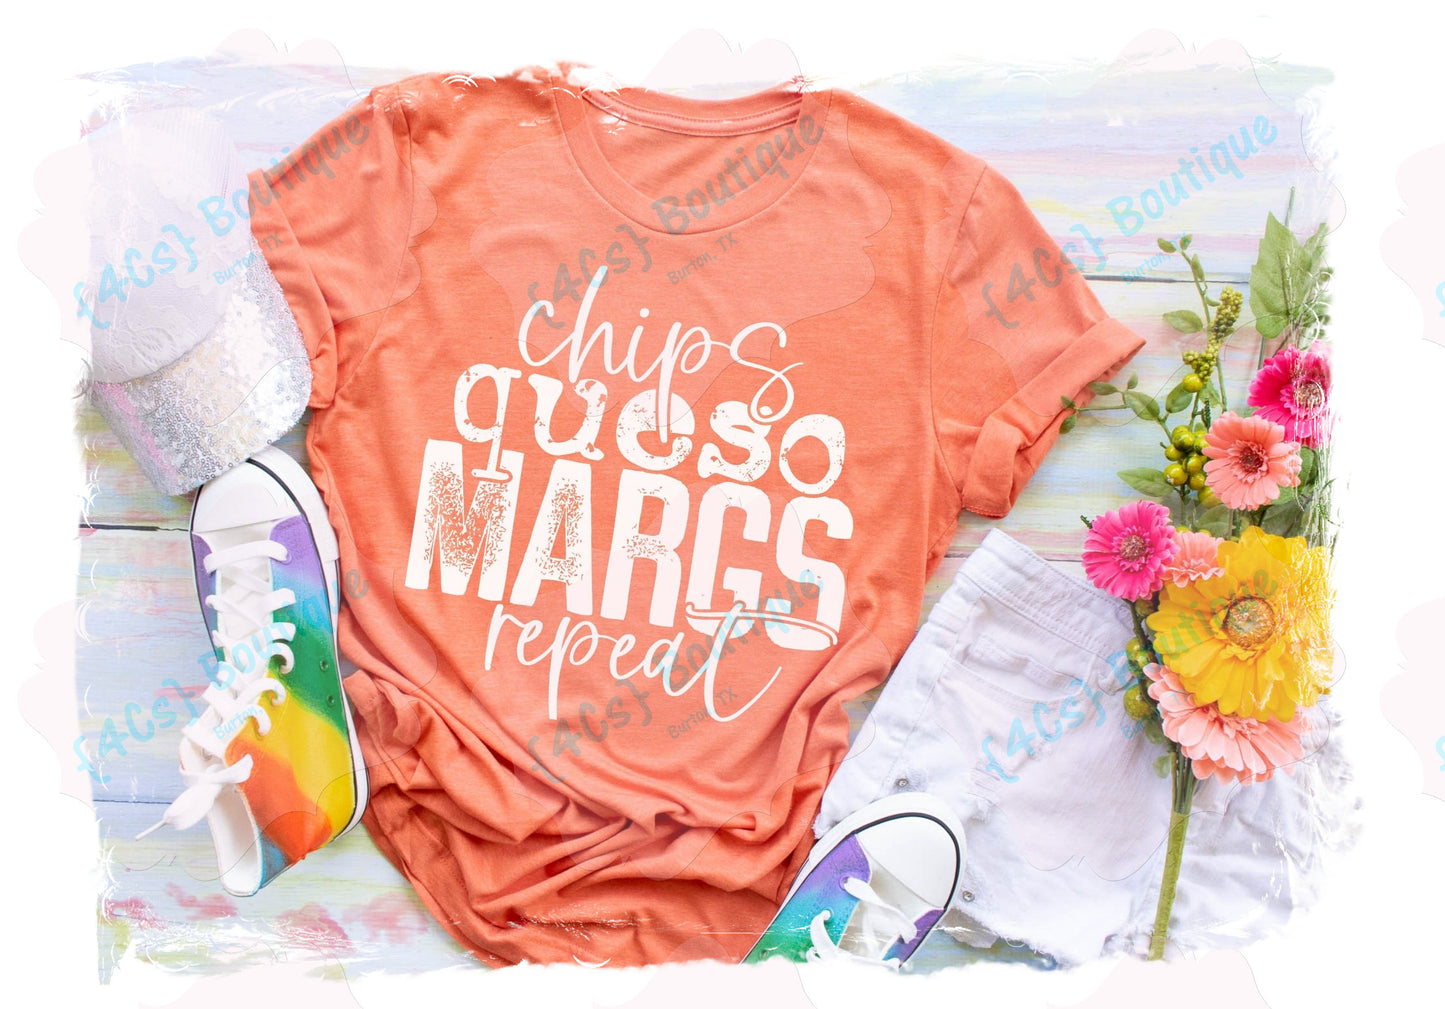 Chips Queso Margs Repeat Shirt